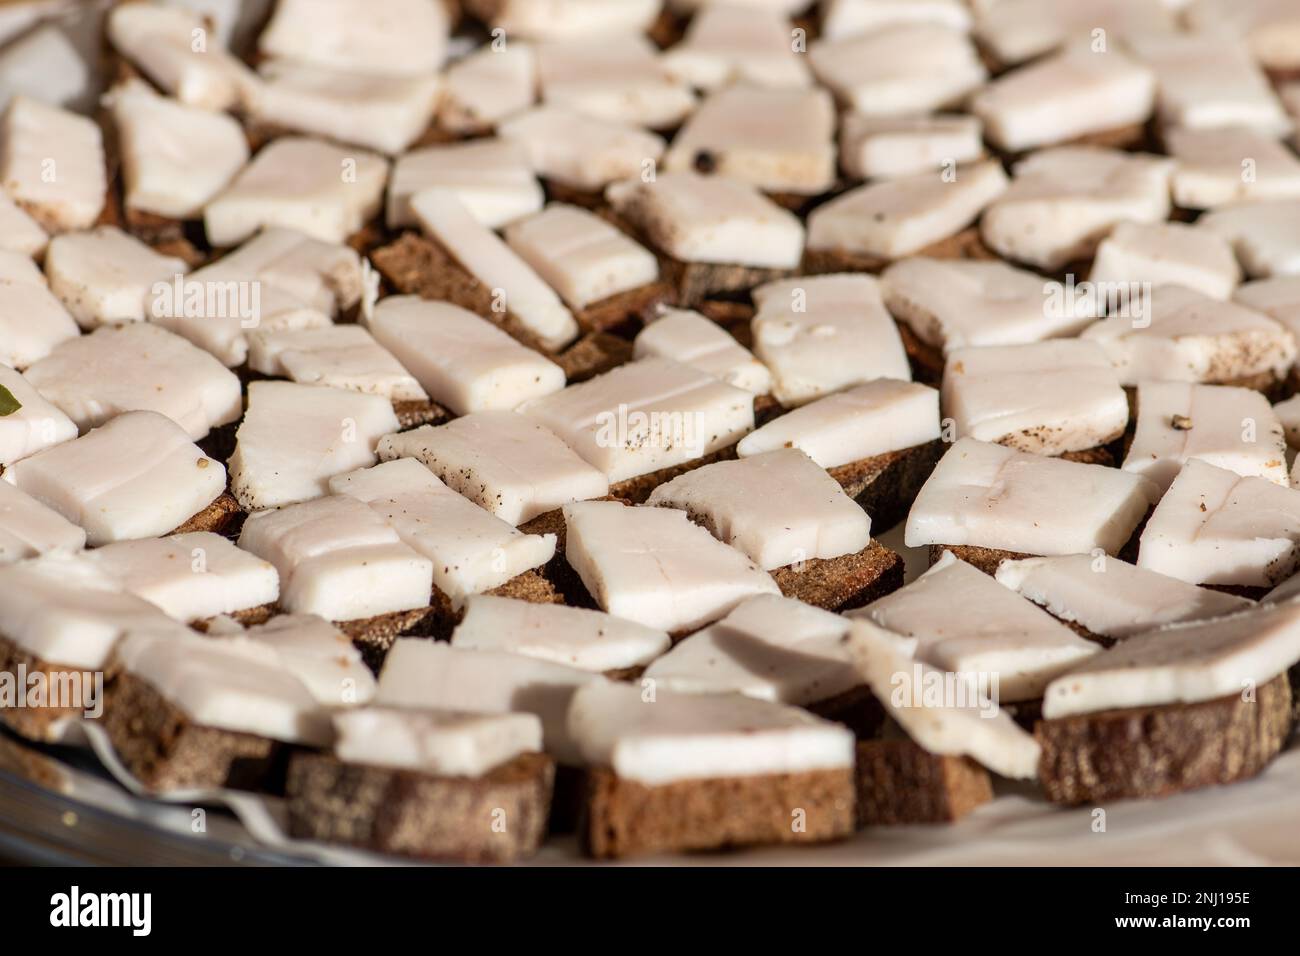 Pieces of lard or bacon, sliced thinly for consumption with black rye bread on a wooden cutting board in a street food market, close up Stock Photo